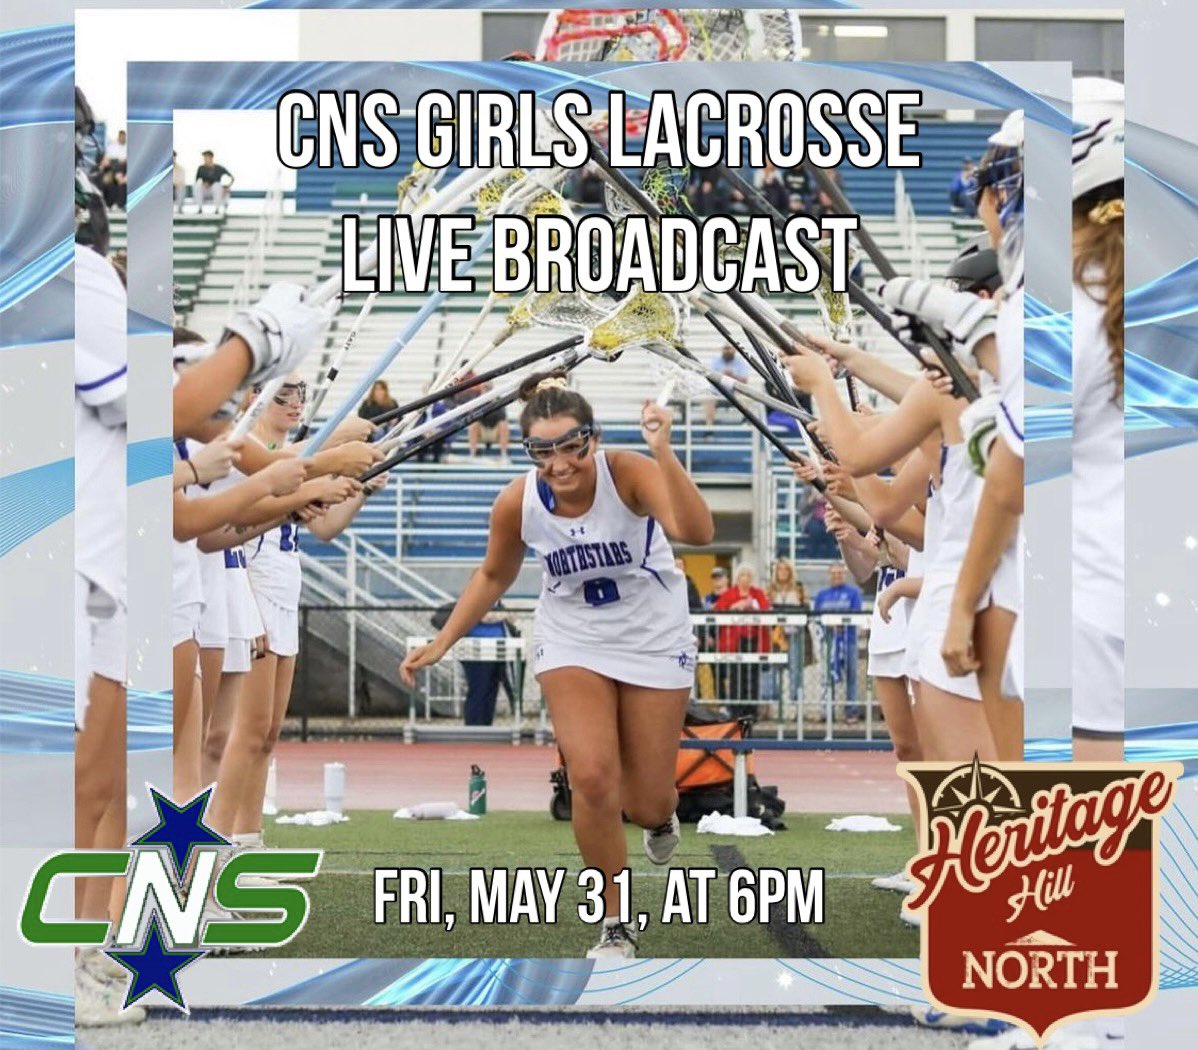 Come have dinner & a show as DT spotlights the CNS Northstars Girls Lacrosse Team in a #WakeUpCall LIVE Broadcast on FRI, MAY 31, at 6pm from ON-SITE at Heritage Hill North!! 💙💚🥍🎙️ @CNSAthletics @NSyracuseCSD @NSyracuseCNS